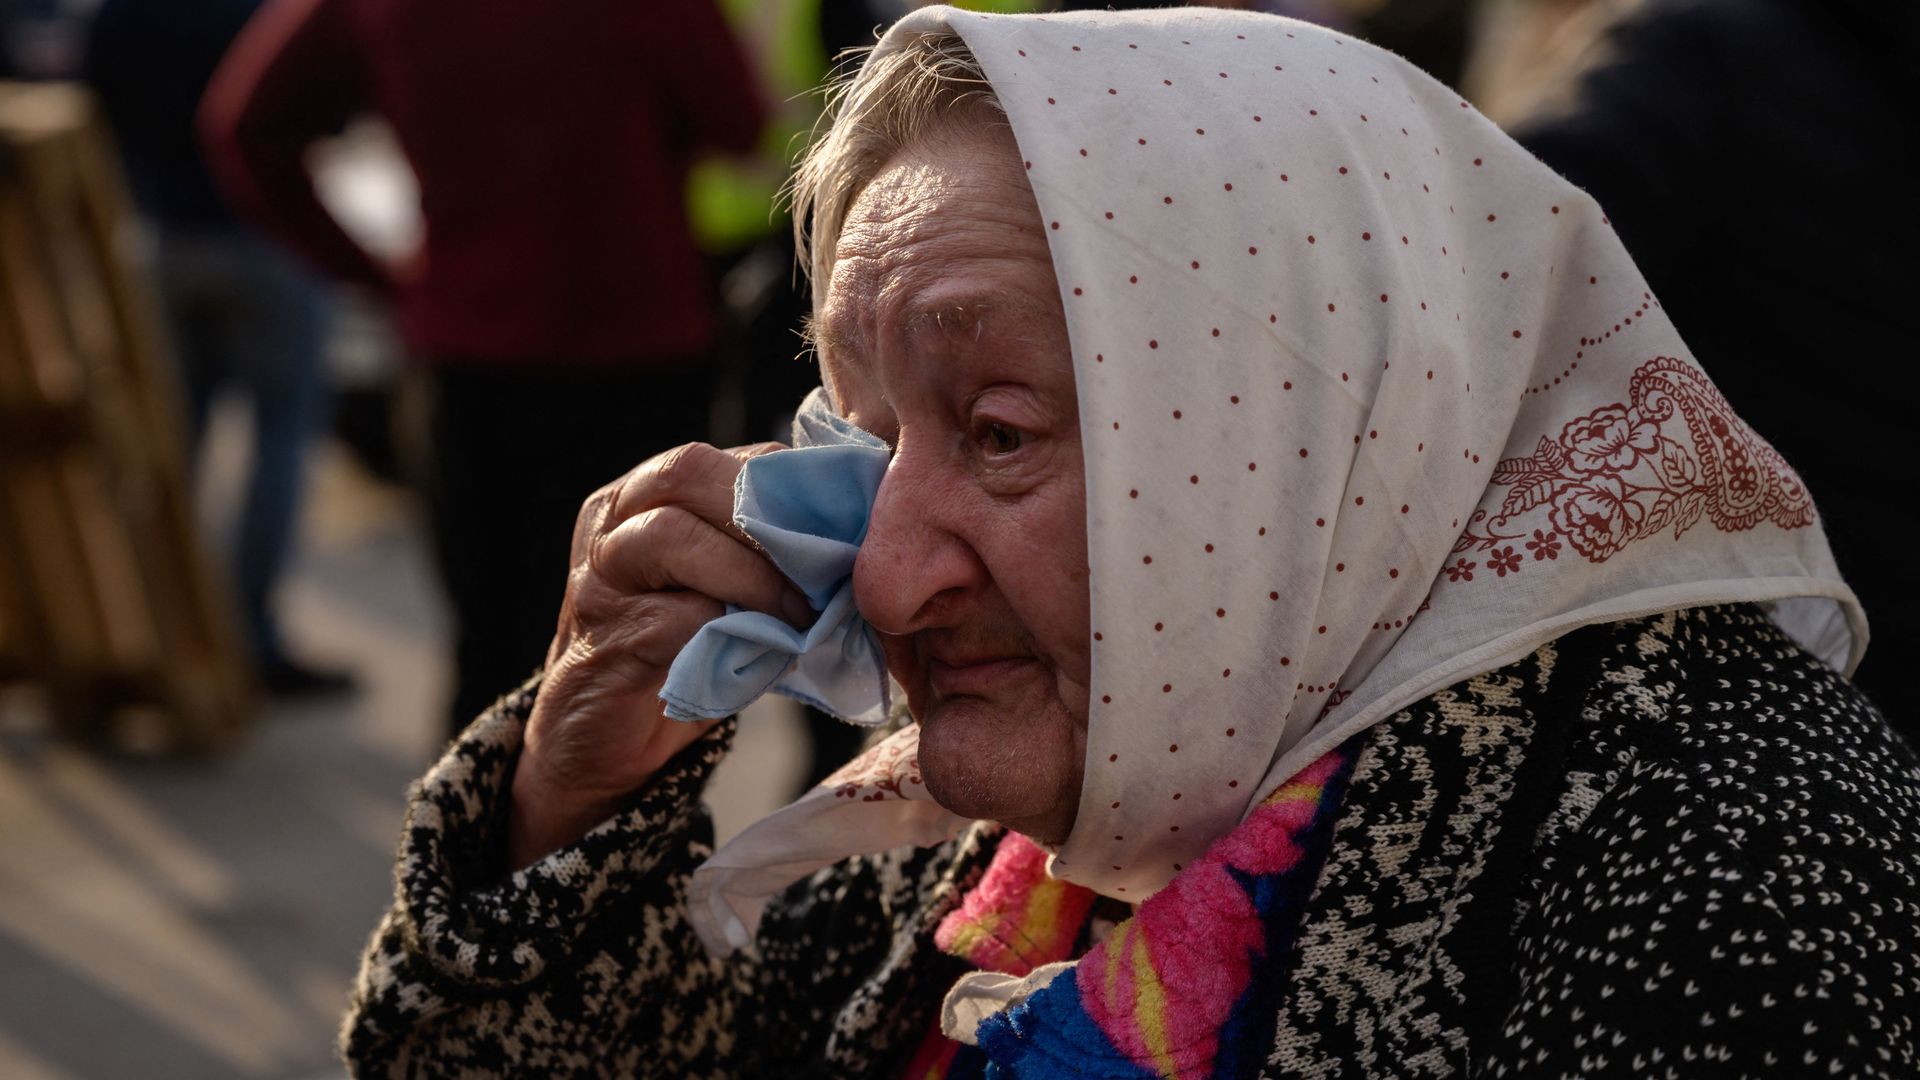 A woman who fled the besieged city of Mariupol reacts as she arrives in a private vehicle at a registration and processing area for internally displaced people in Zaporizhzhia